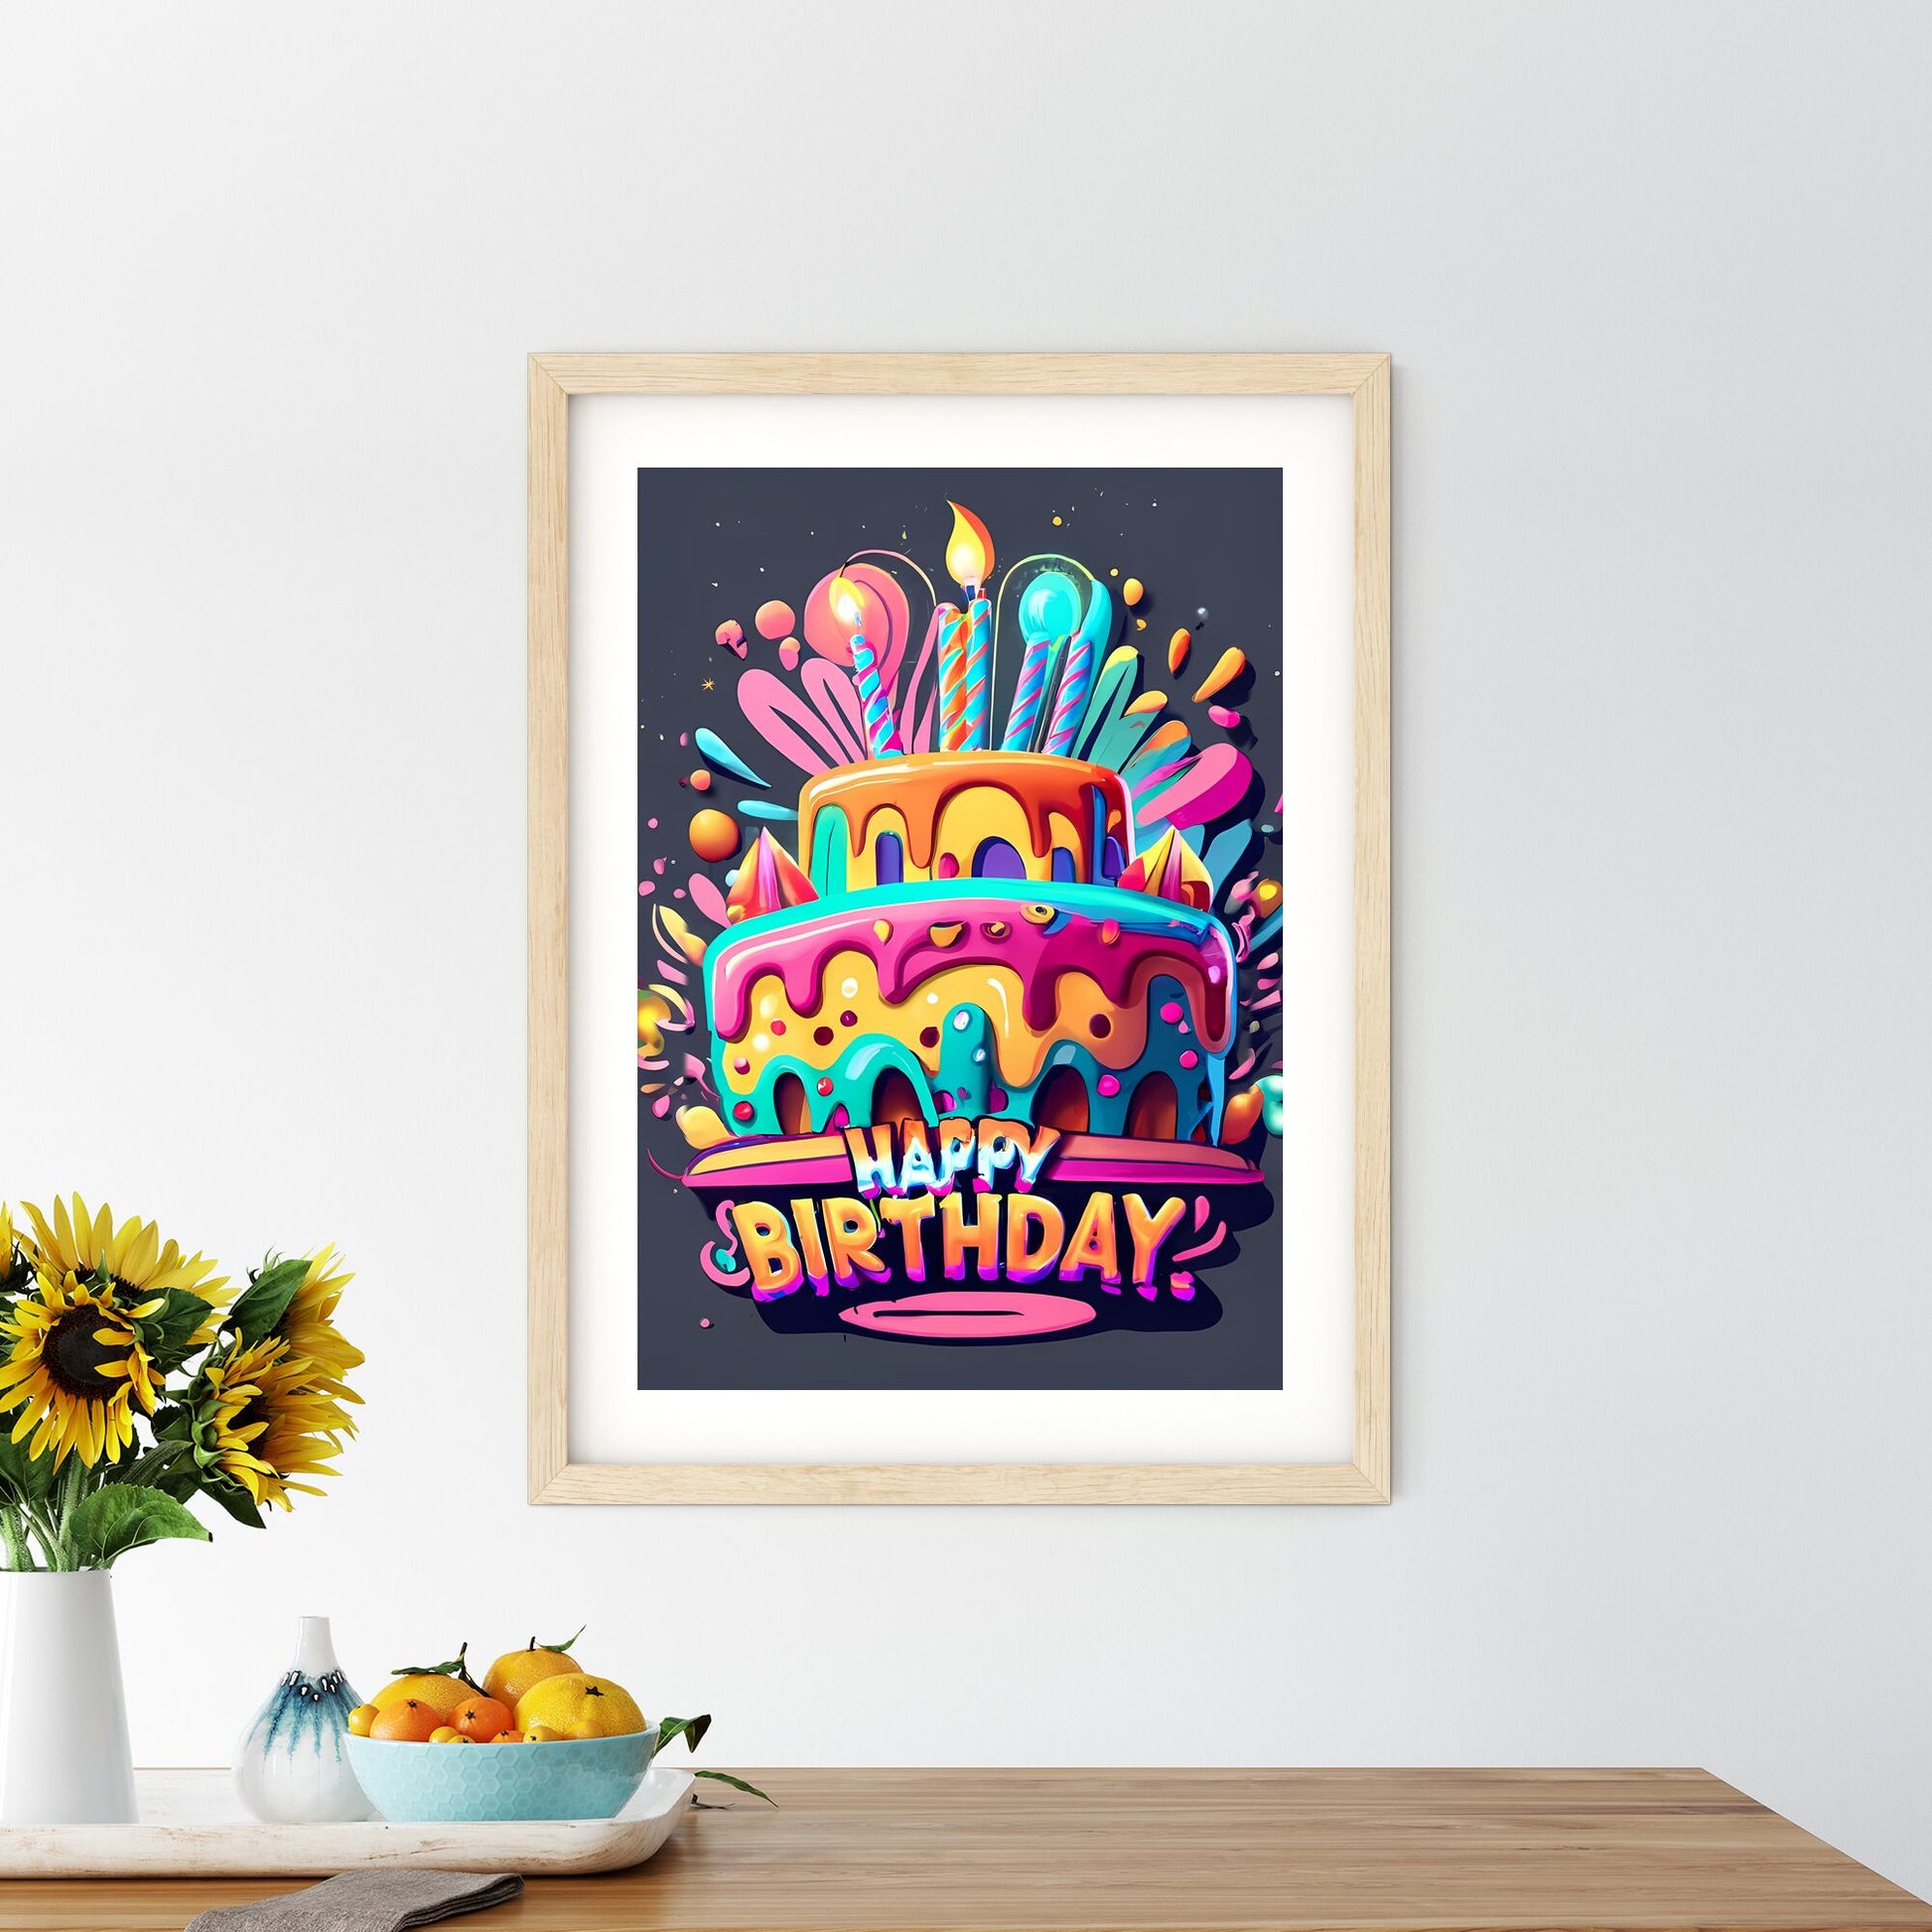 Happy Birthday - A Colorful Cake With Candles Art Print Default Title